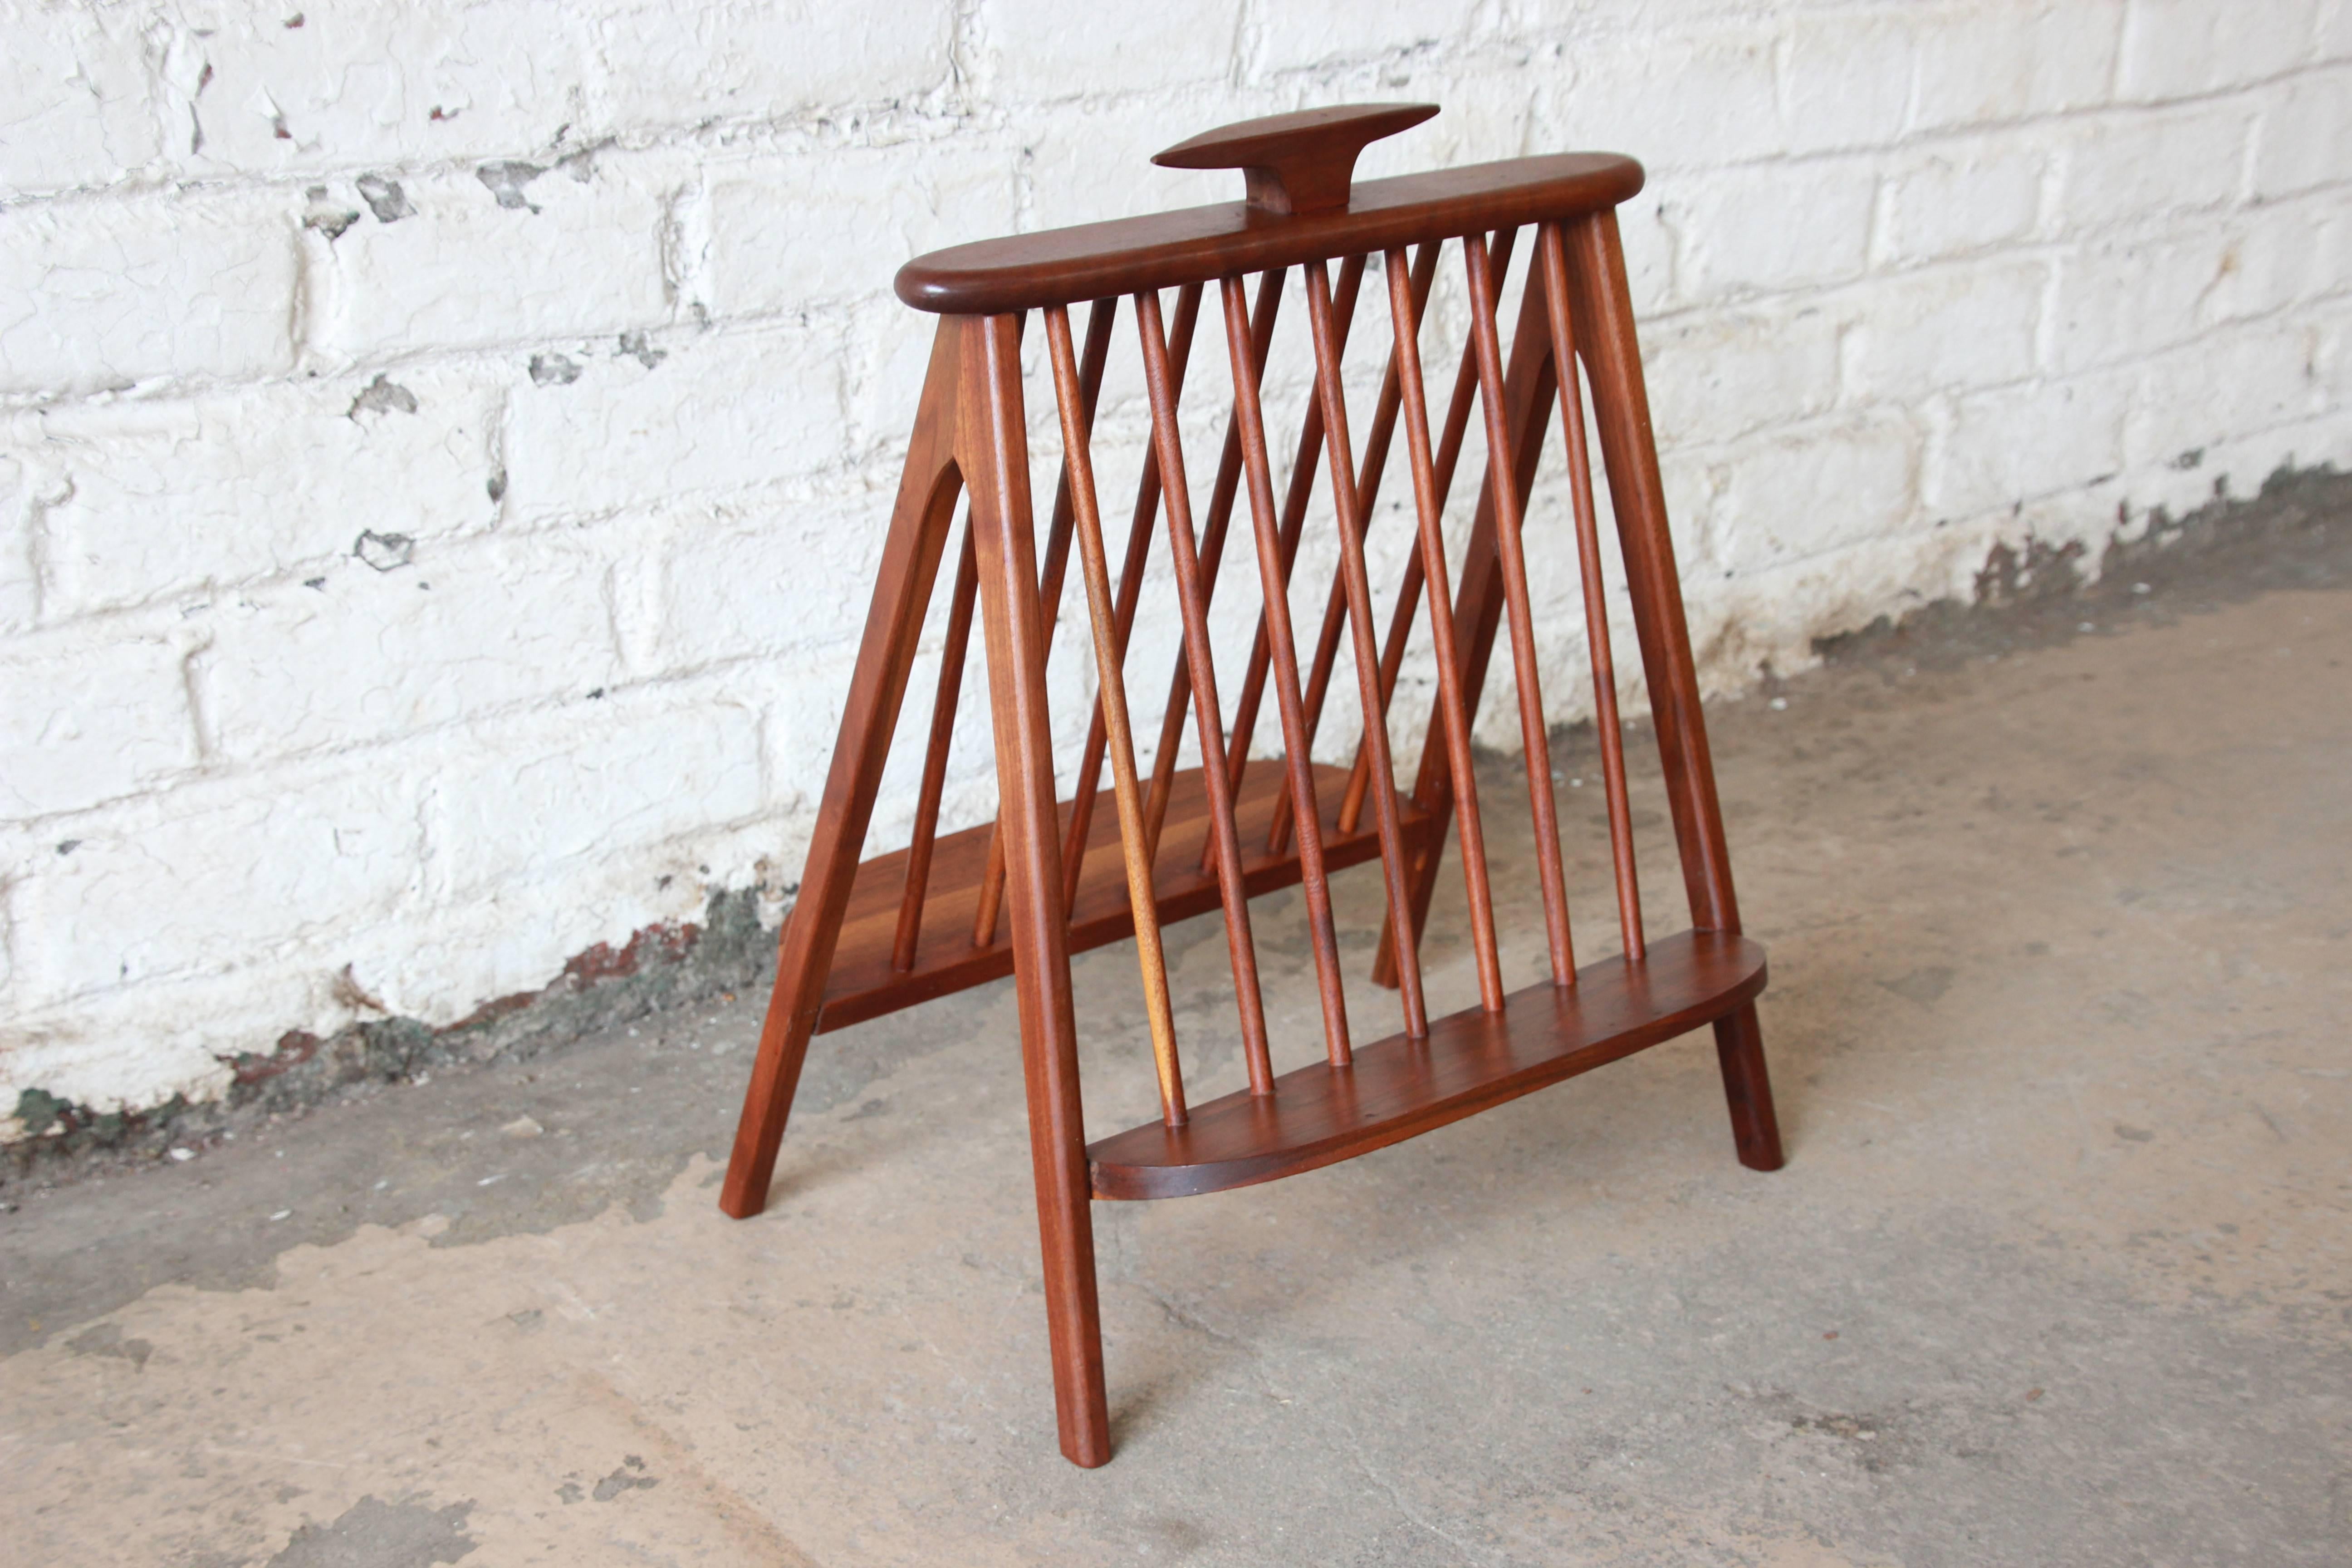 A gorgeous Mid-Century Modern sculpted walnut record holder or magazine rack designed by Arthur Umanoff. The Stand features solid walnut construction with gorgeous wood grain. It is sturdy and in very good original vintage condition, with minor wear